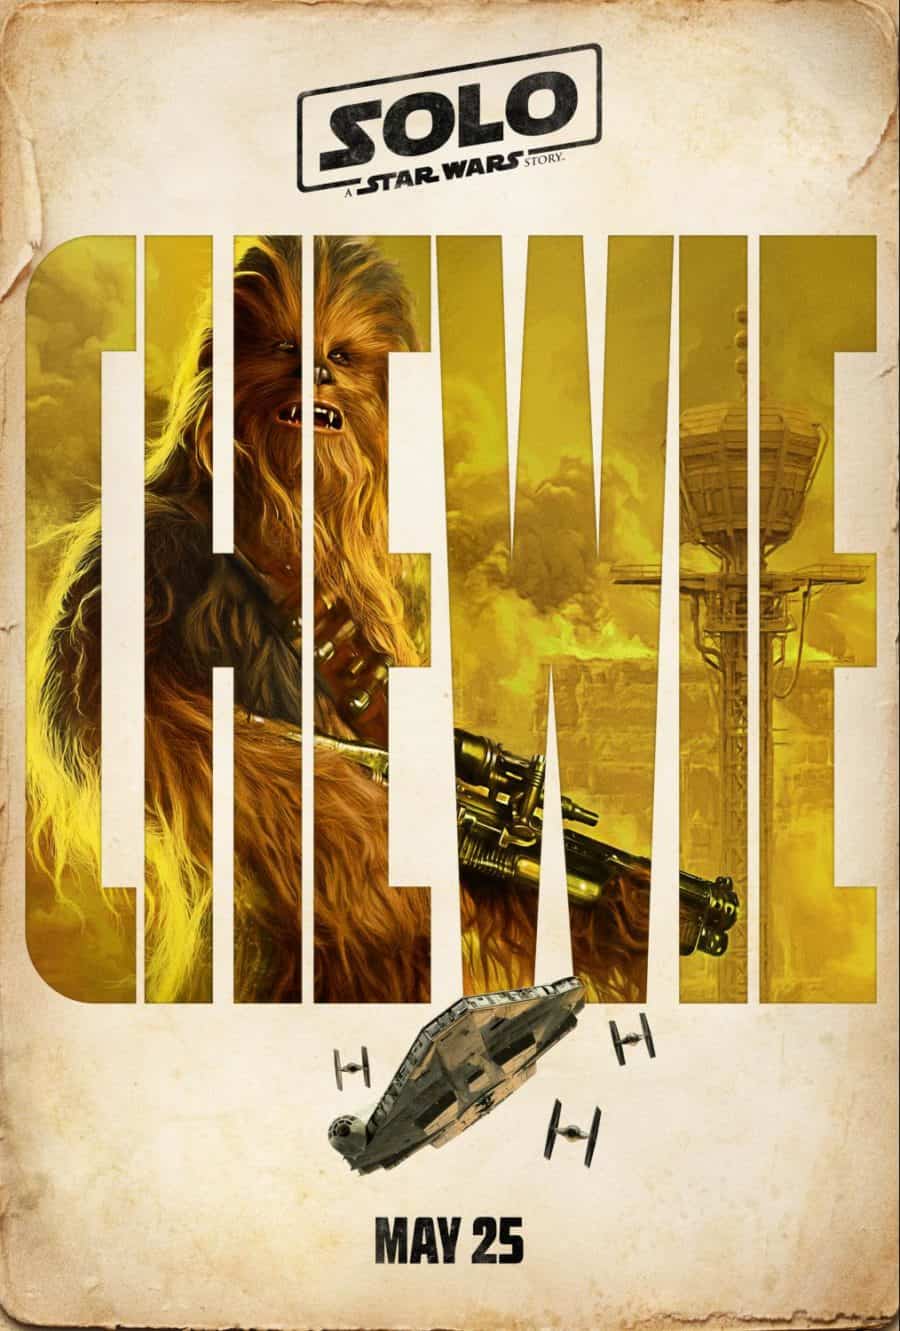 Han Solo - A Star Wars Story - Chewie poster